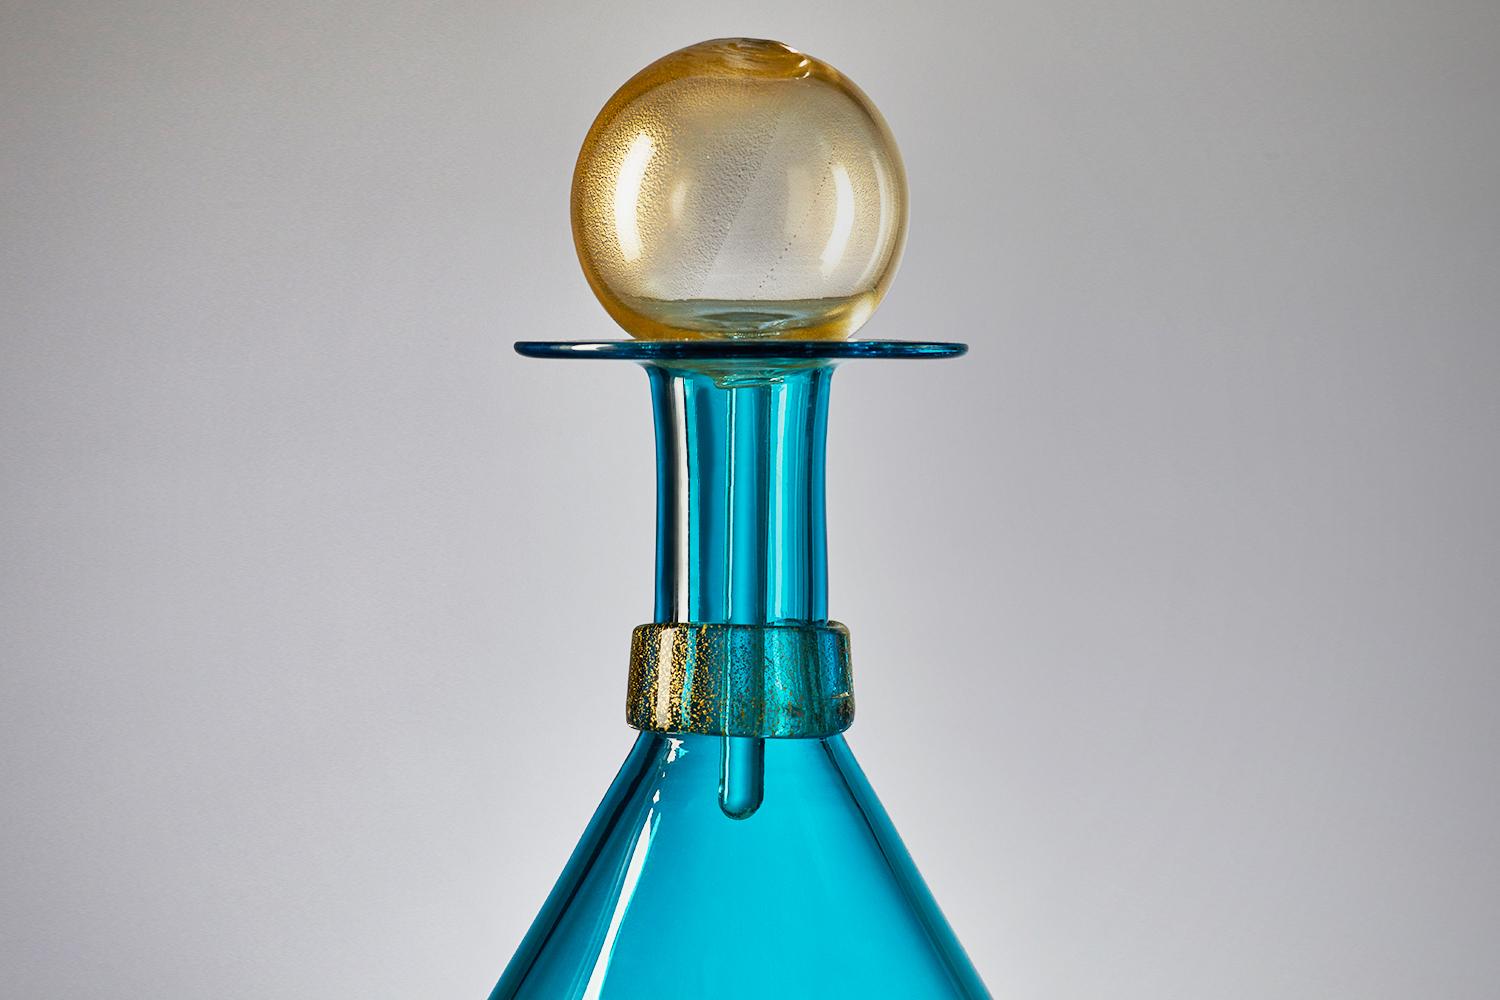 The modernist hand blown Tall Elliptical Jewel Bottle by Vetro Vero features vibrant Turquoise Blue glass and shimmering gold details. Inspired by apothecary collections and decanters of Mid-Century Modern design, the bright aquamarine carafe makes